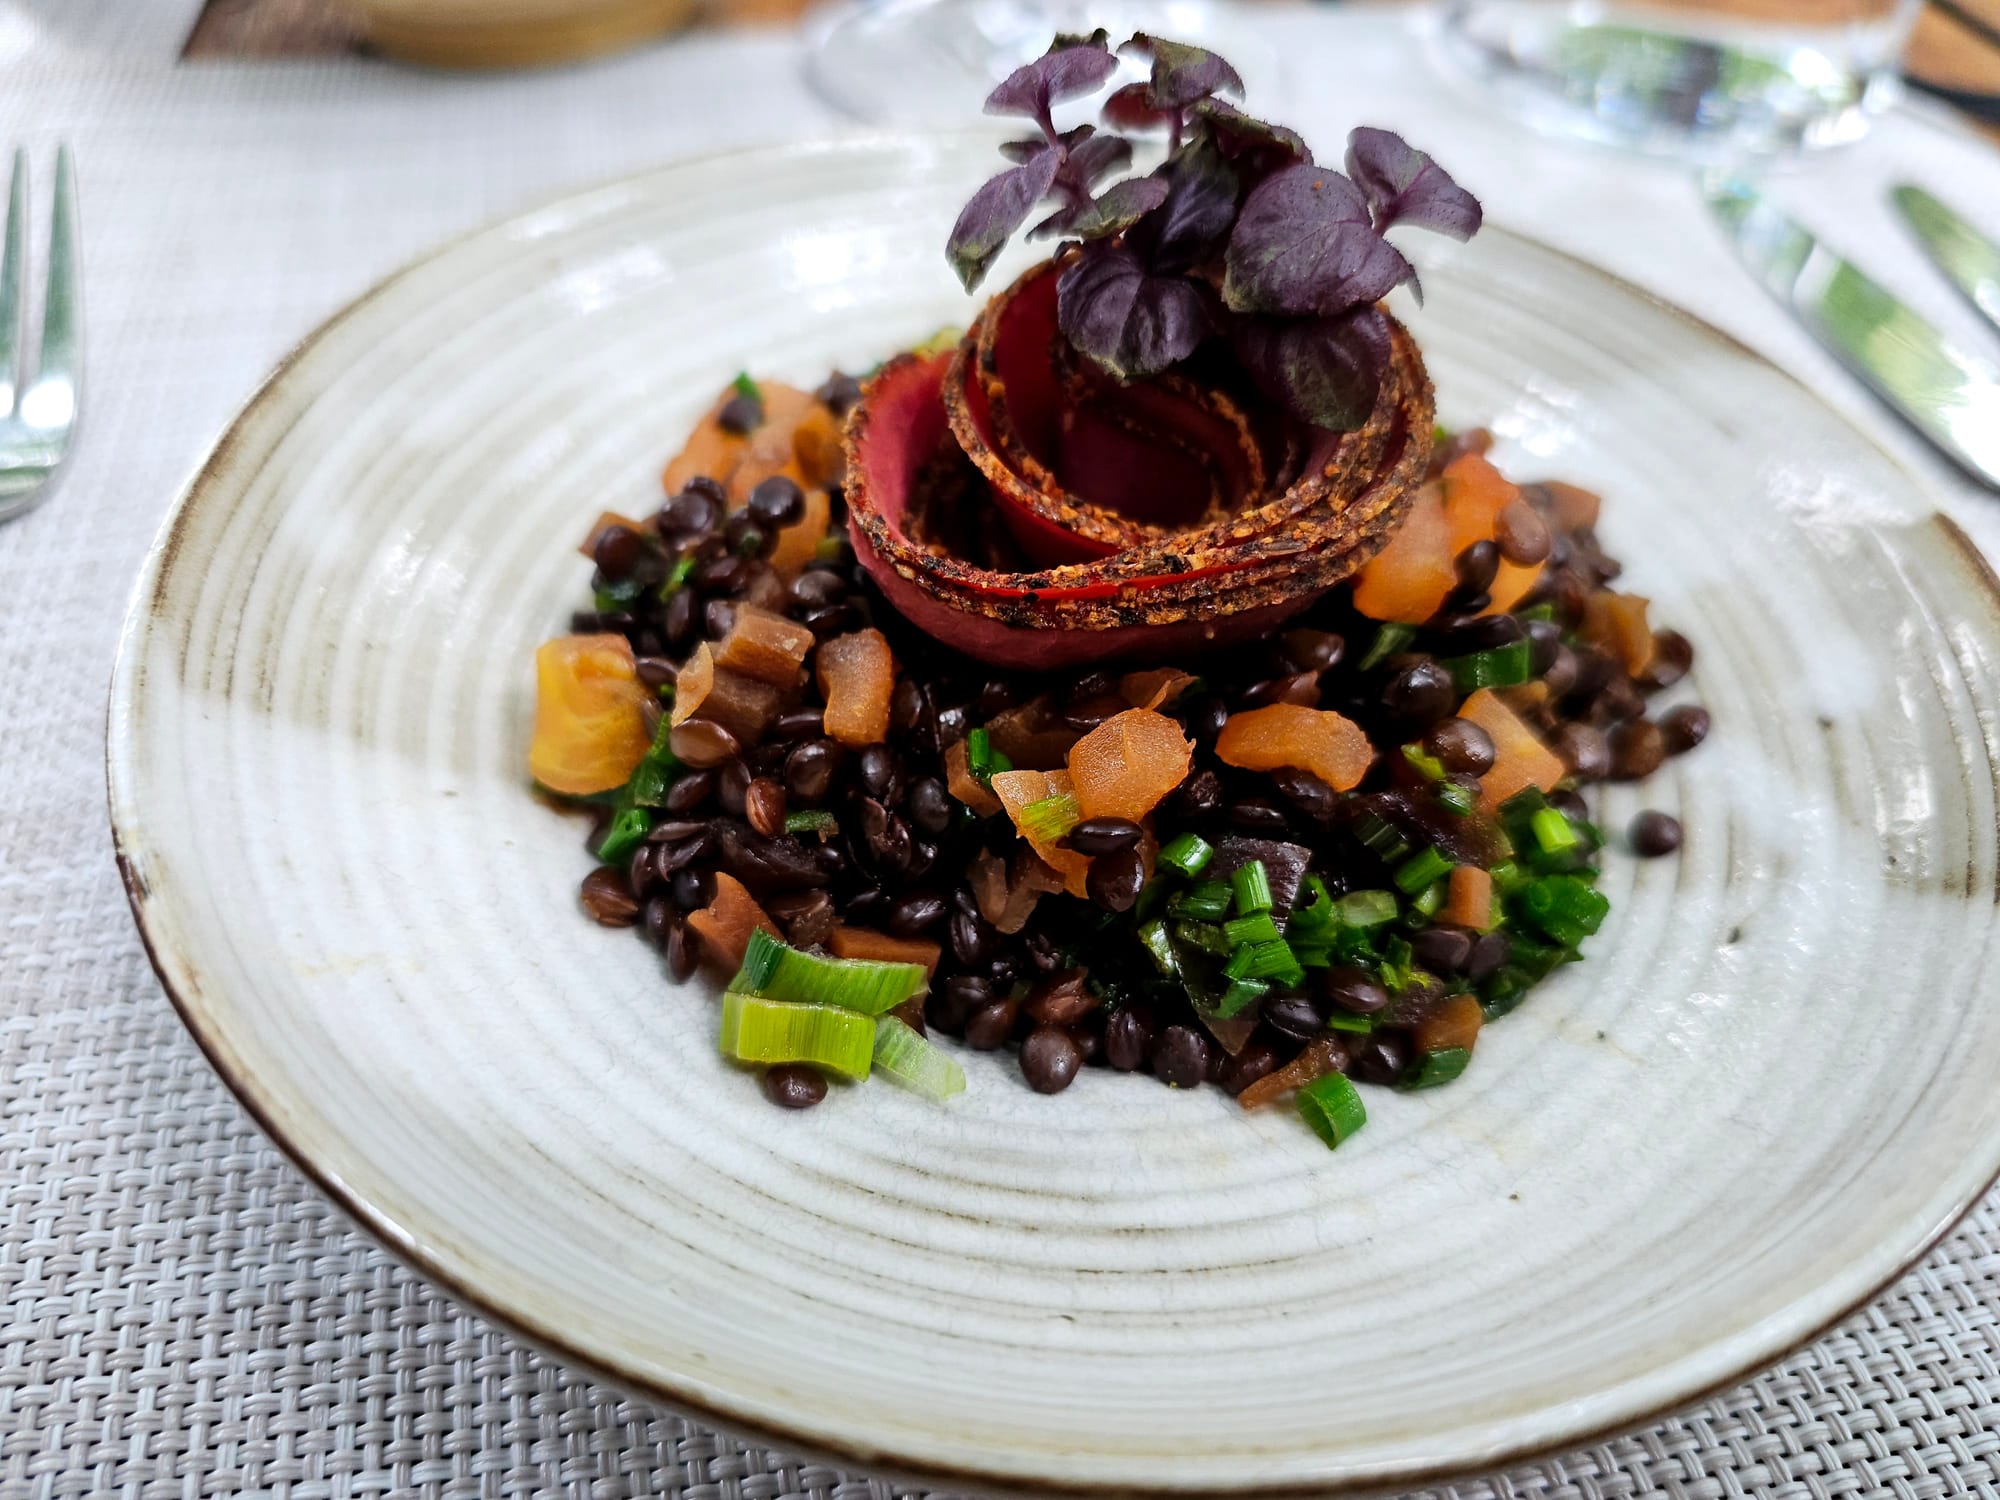 Pastrami on a bed of lentils, on an off-white plate 